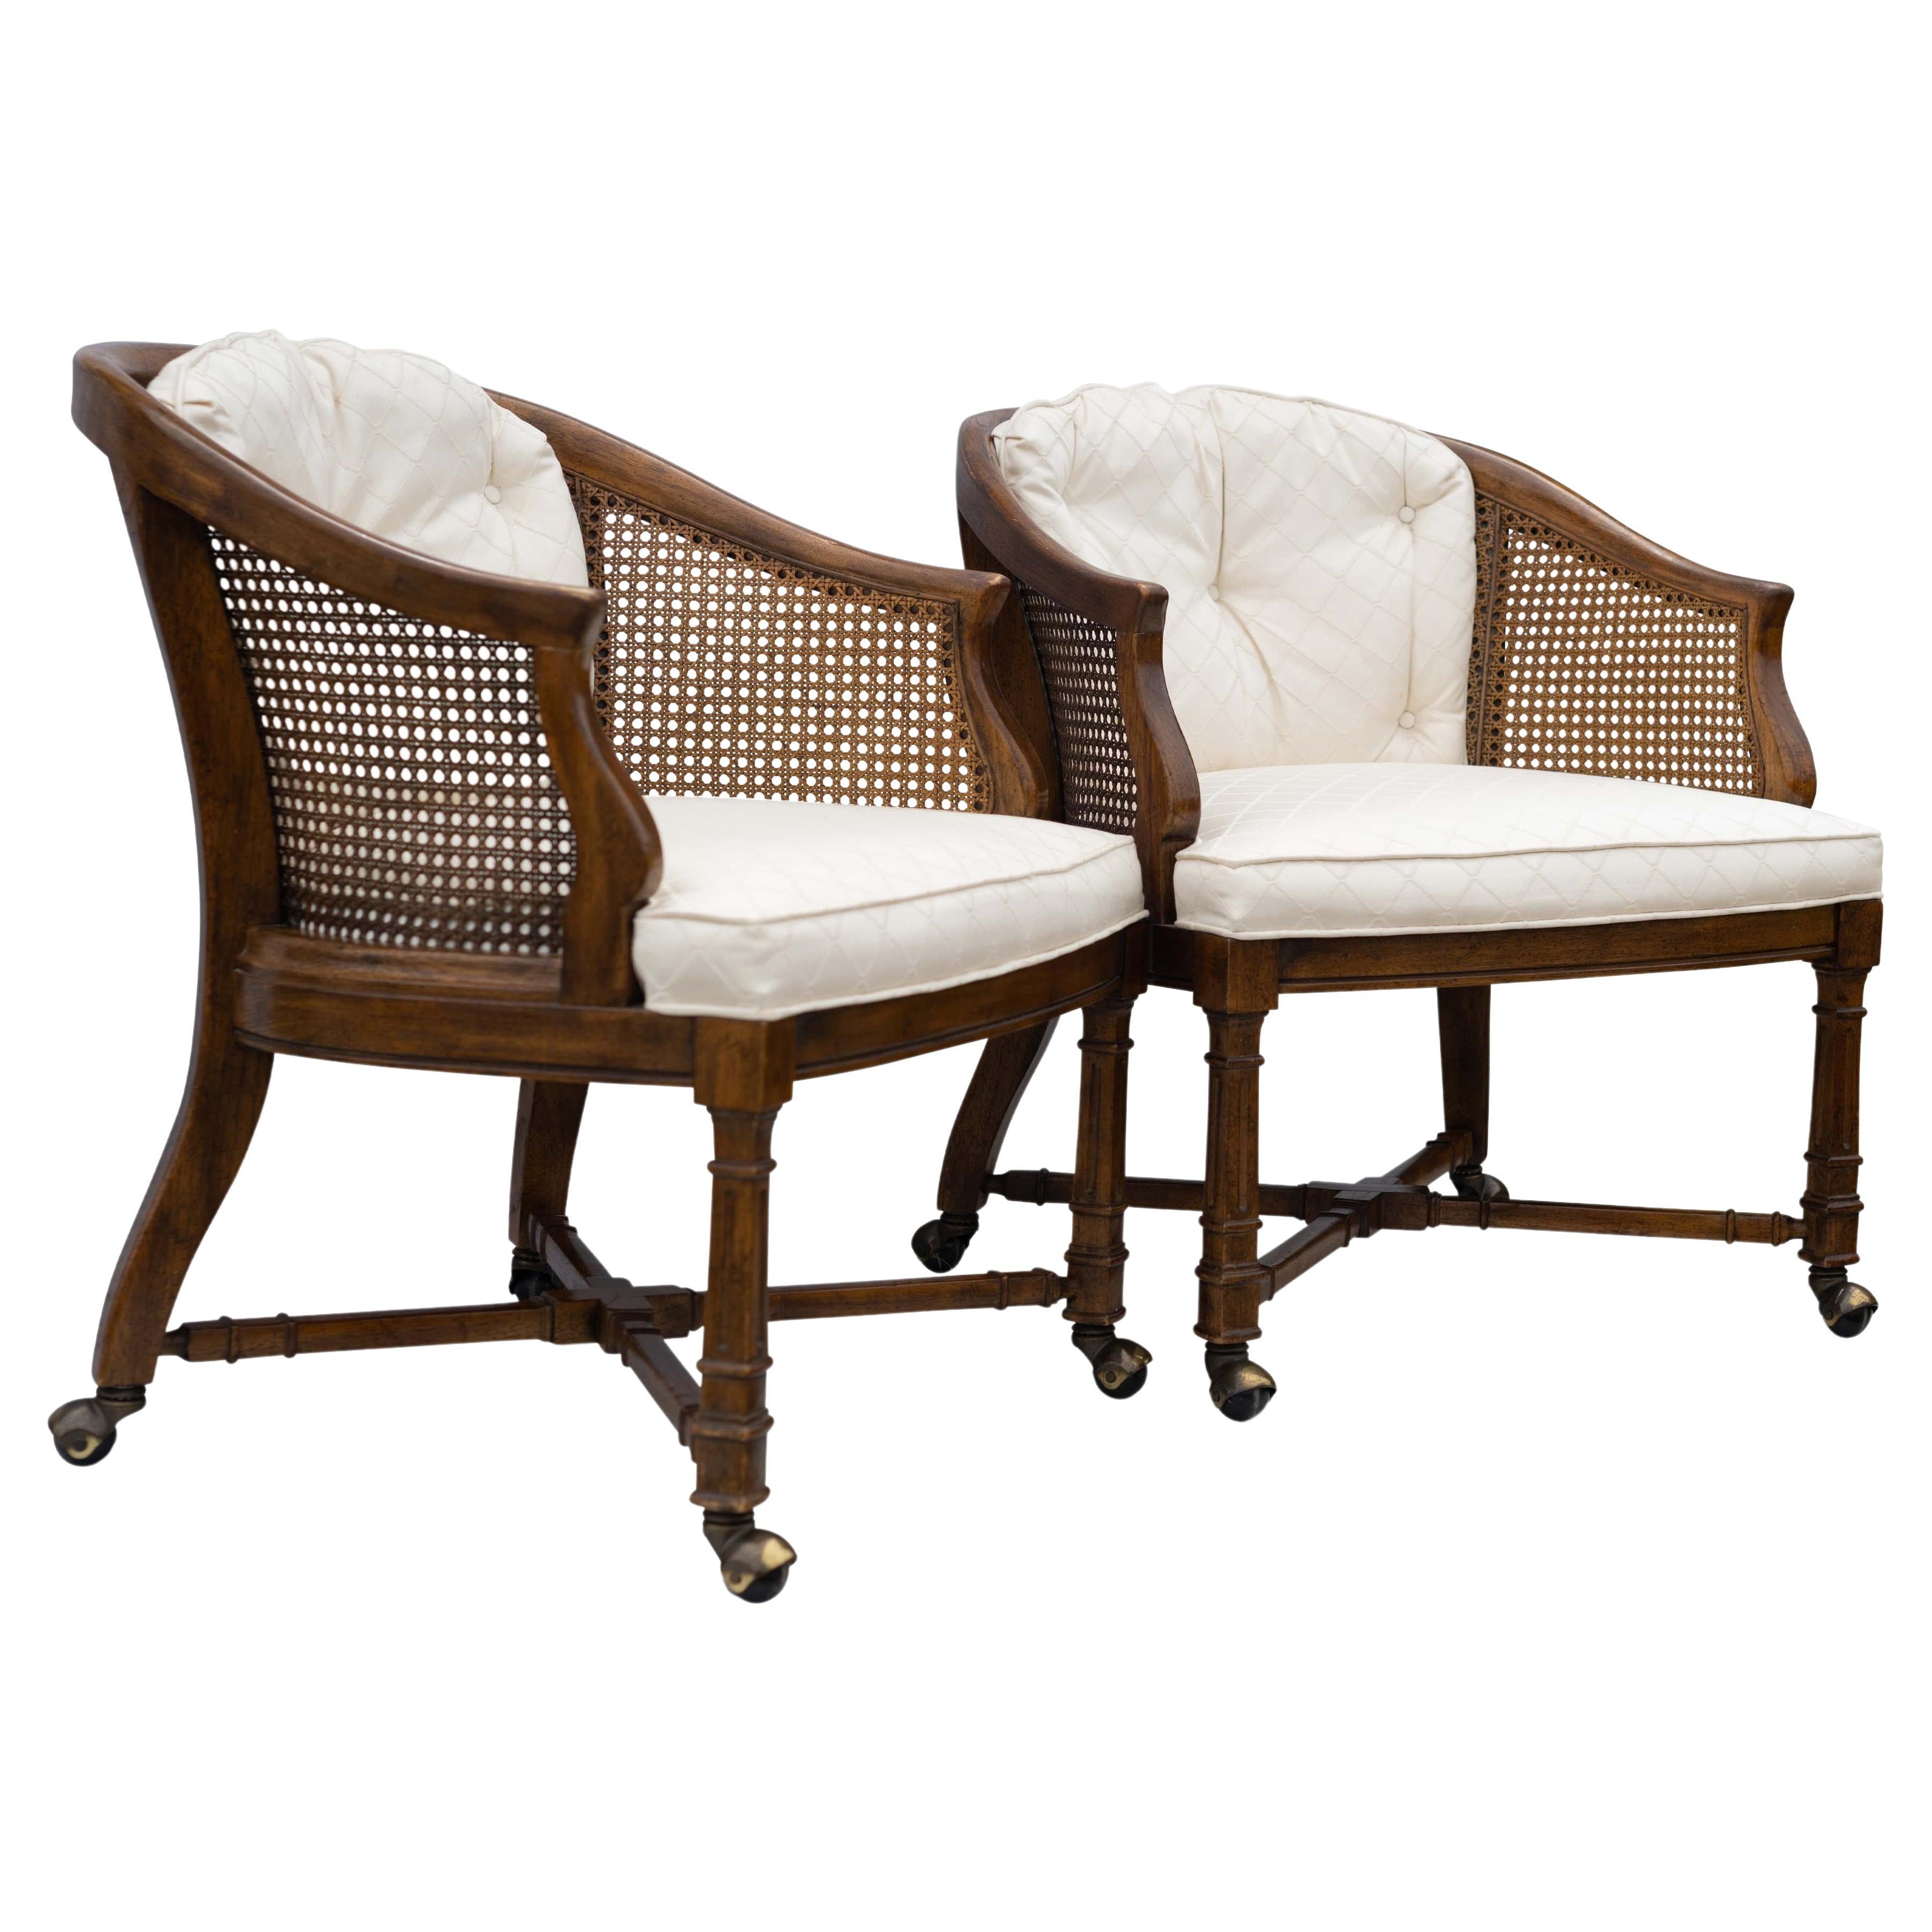 A Pair of Upholstered Bergere Armchairs on Castors American of Martinsville
Produced in the Mid-1970s
Founded in 1906, American of Martinsville was founded by Virginia tobacco producers and produces bedroom furniture. In the early 1920s the